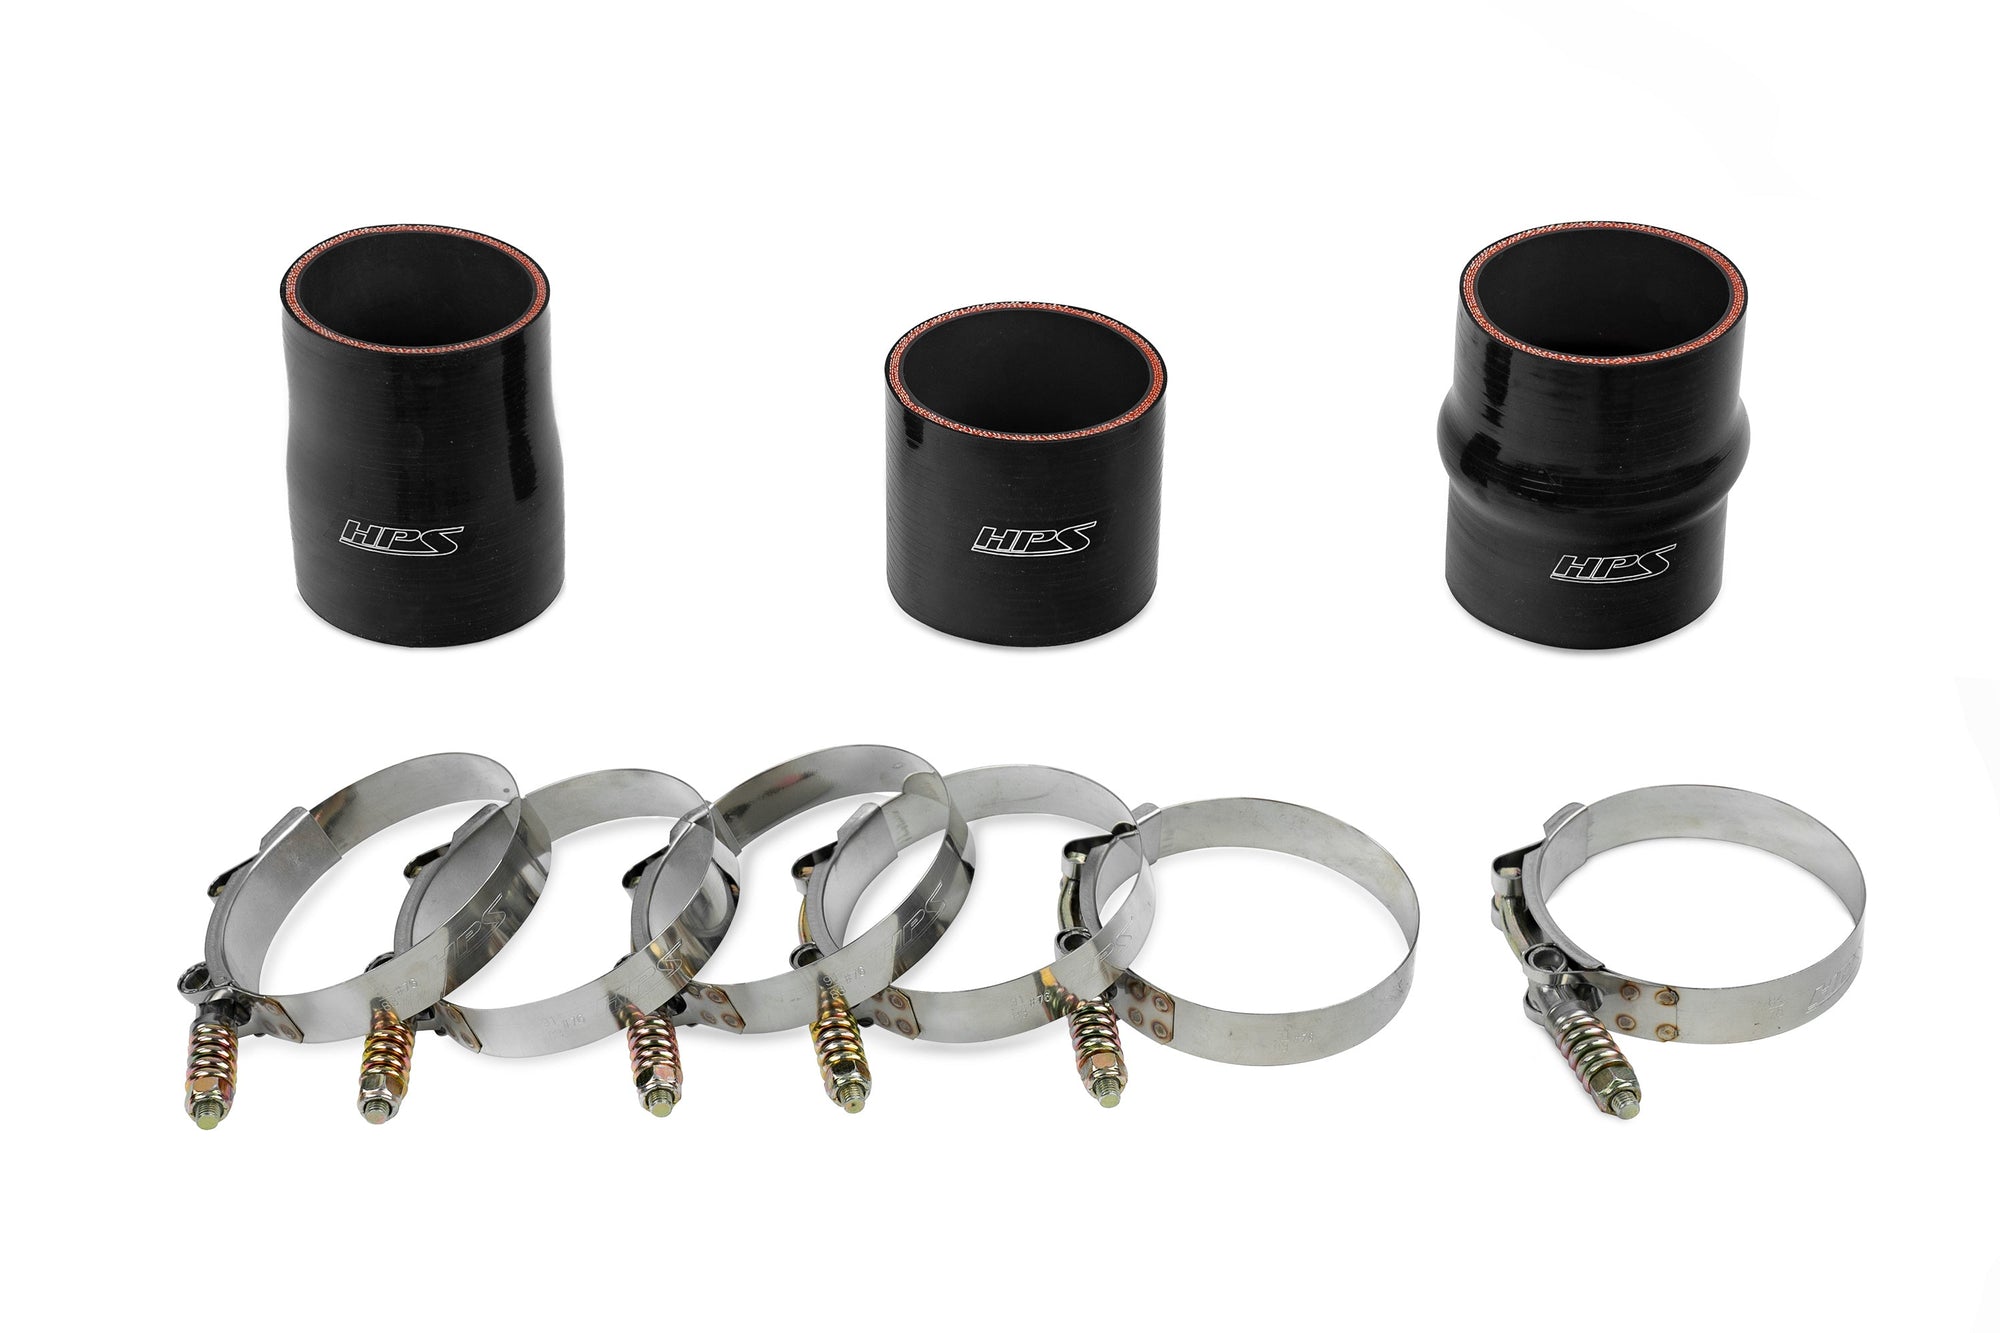 HPS Ultra High Temp Oil Resistant Silicone Couplers included in Charge Pipe Hot Side 17-19 GMC Sierra 2500HD Duramax 6.6L V8 Diesel Turbo L5P Duramax 17-146